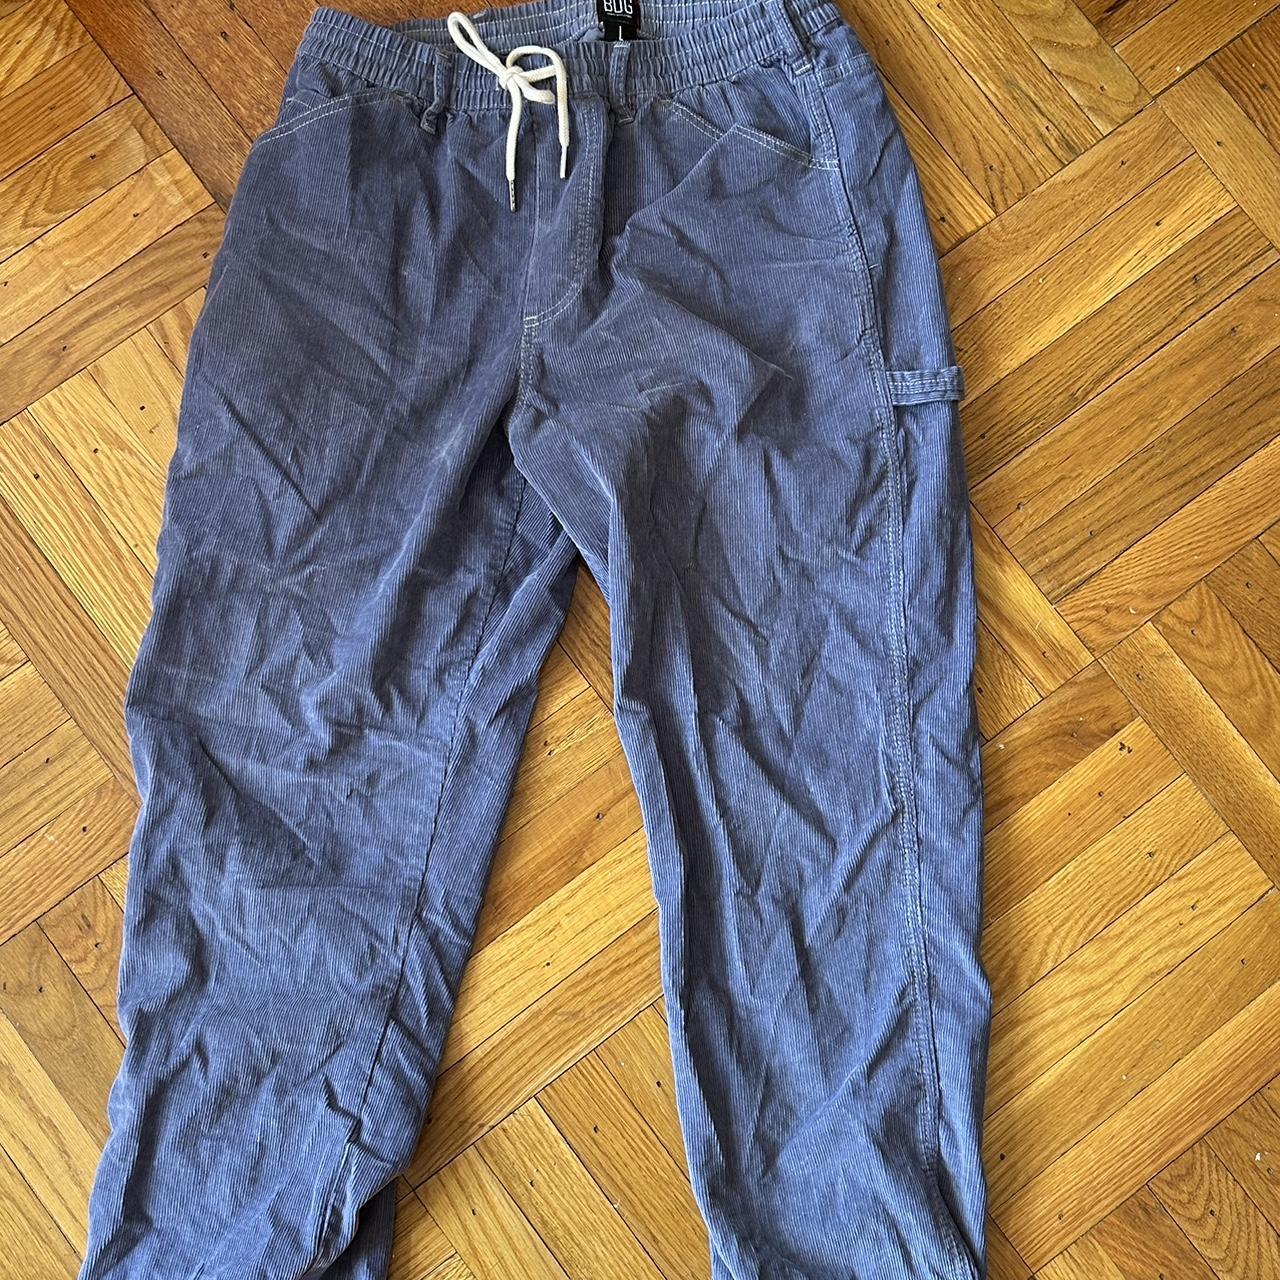 Urban Outfitters Men's Blue Trousers | Depop